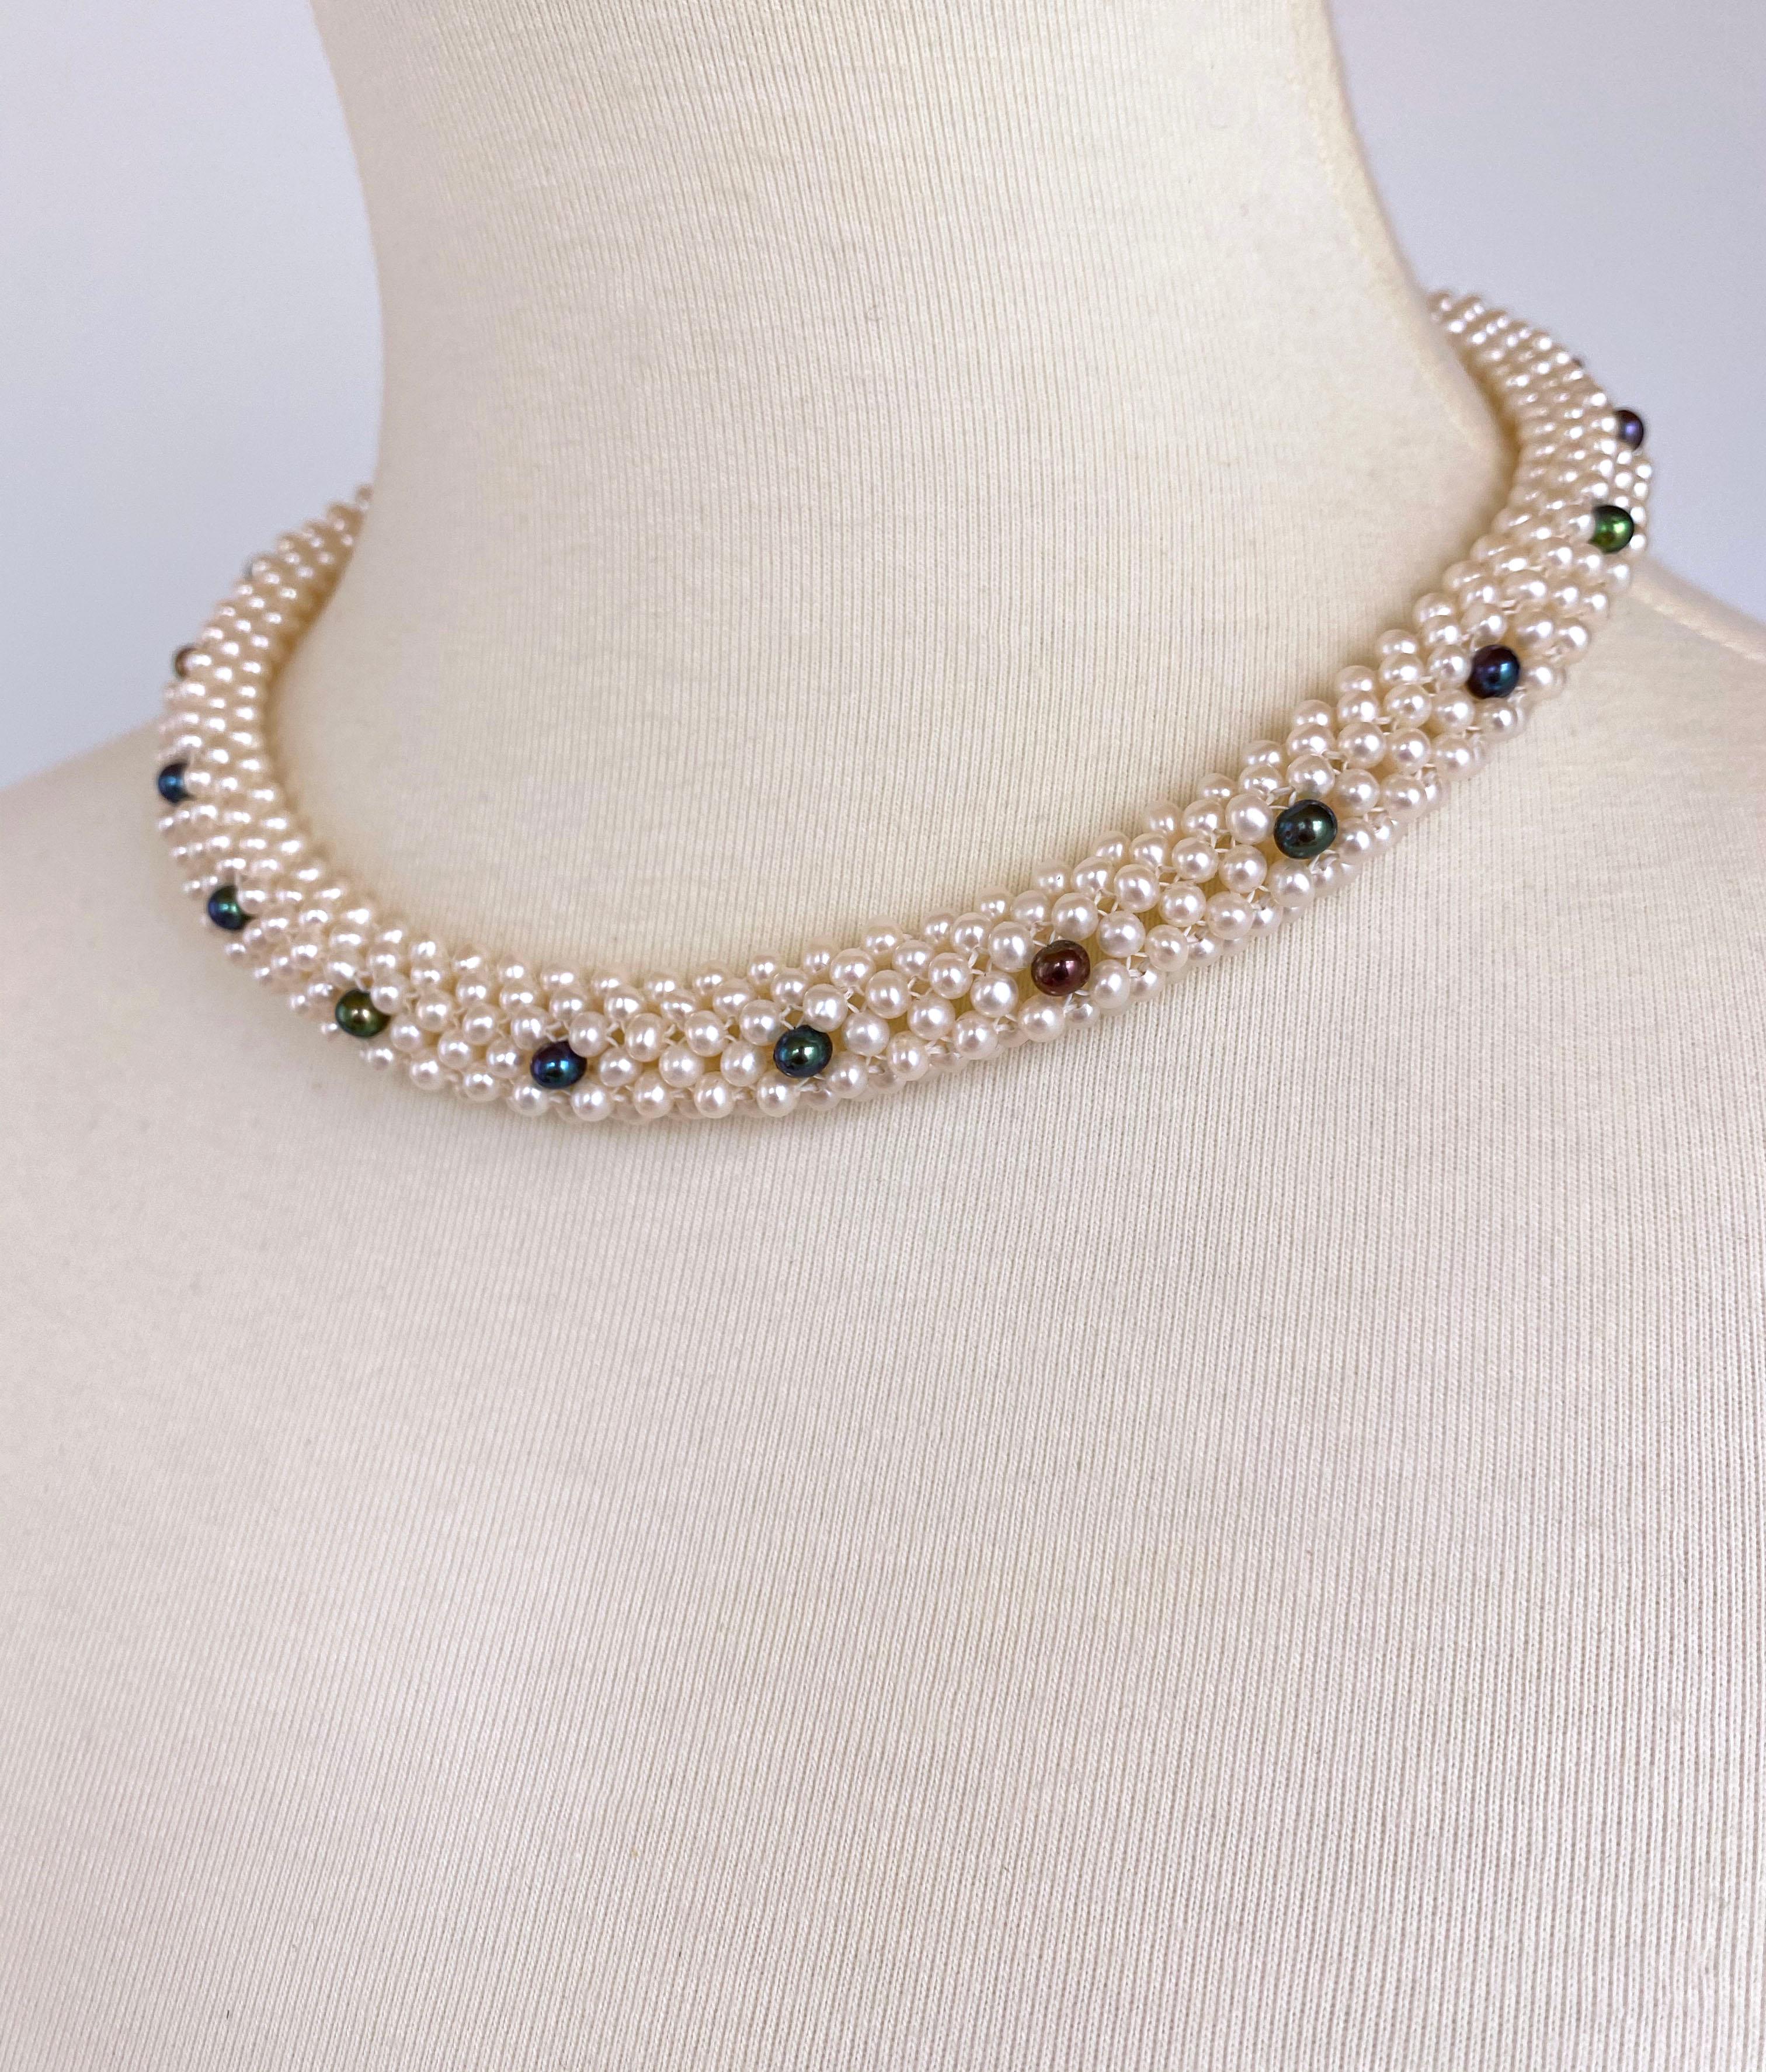 Beautiful piece made by Marina J. This necklace features gorgeous high luster Black and White Pearls, all intricately hand woven into a 3 dimensional lace like design. As shown in photos, the bottom of this piece has been woven flat, allowing it to